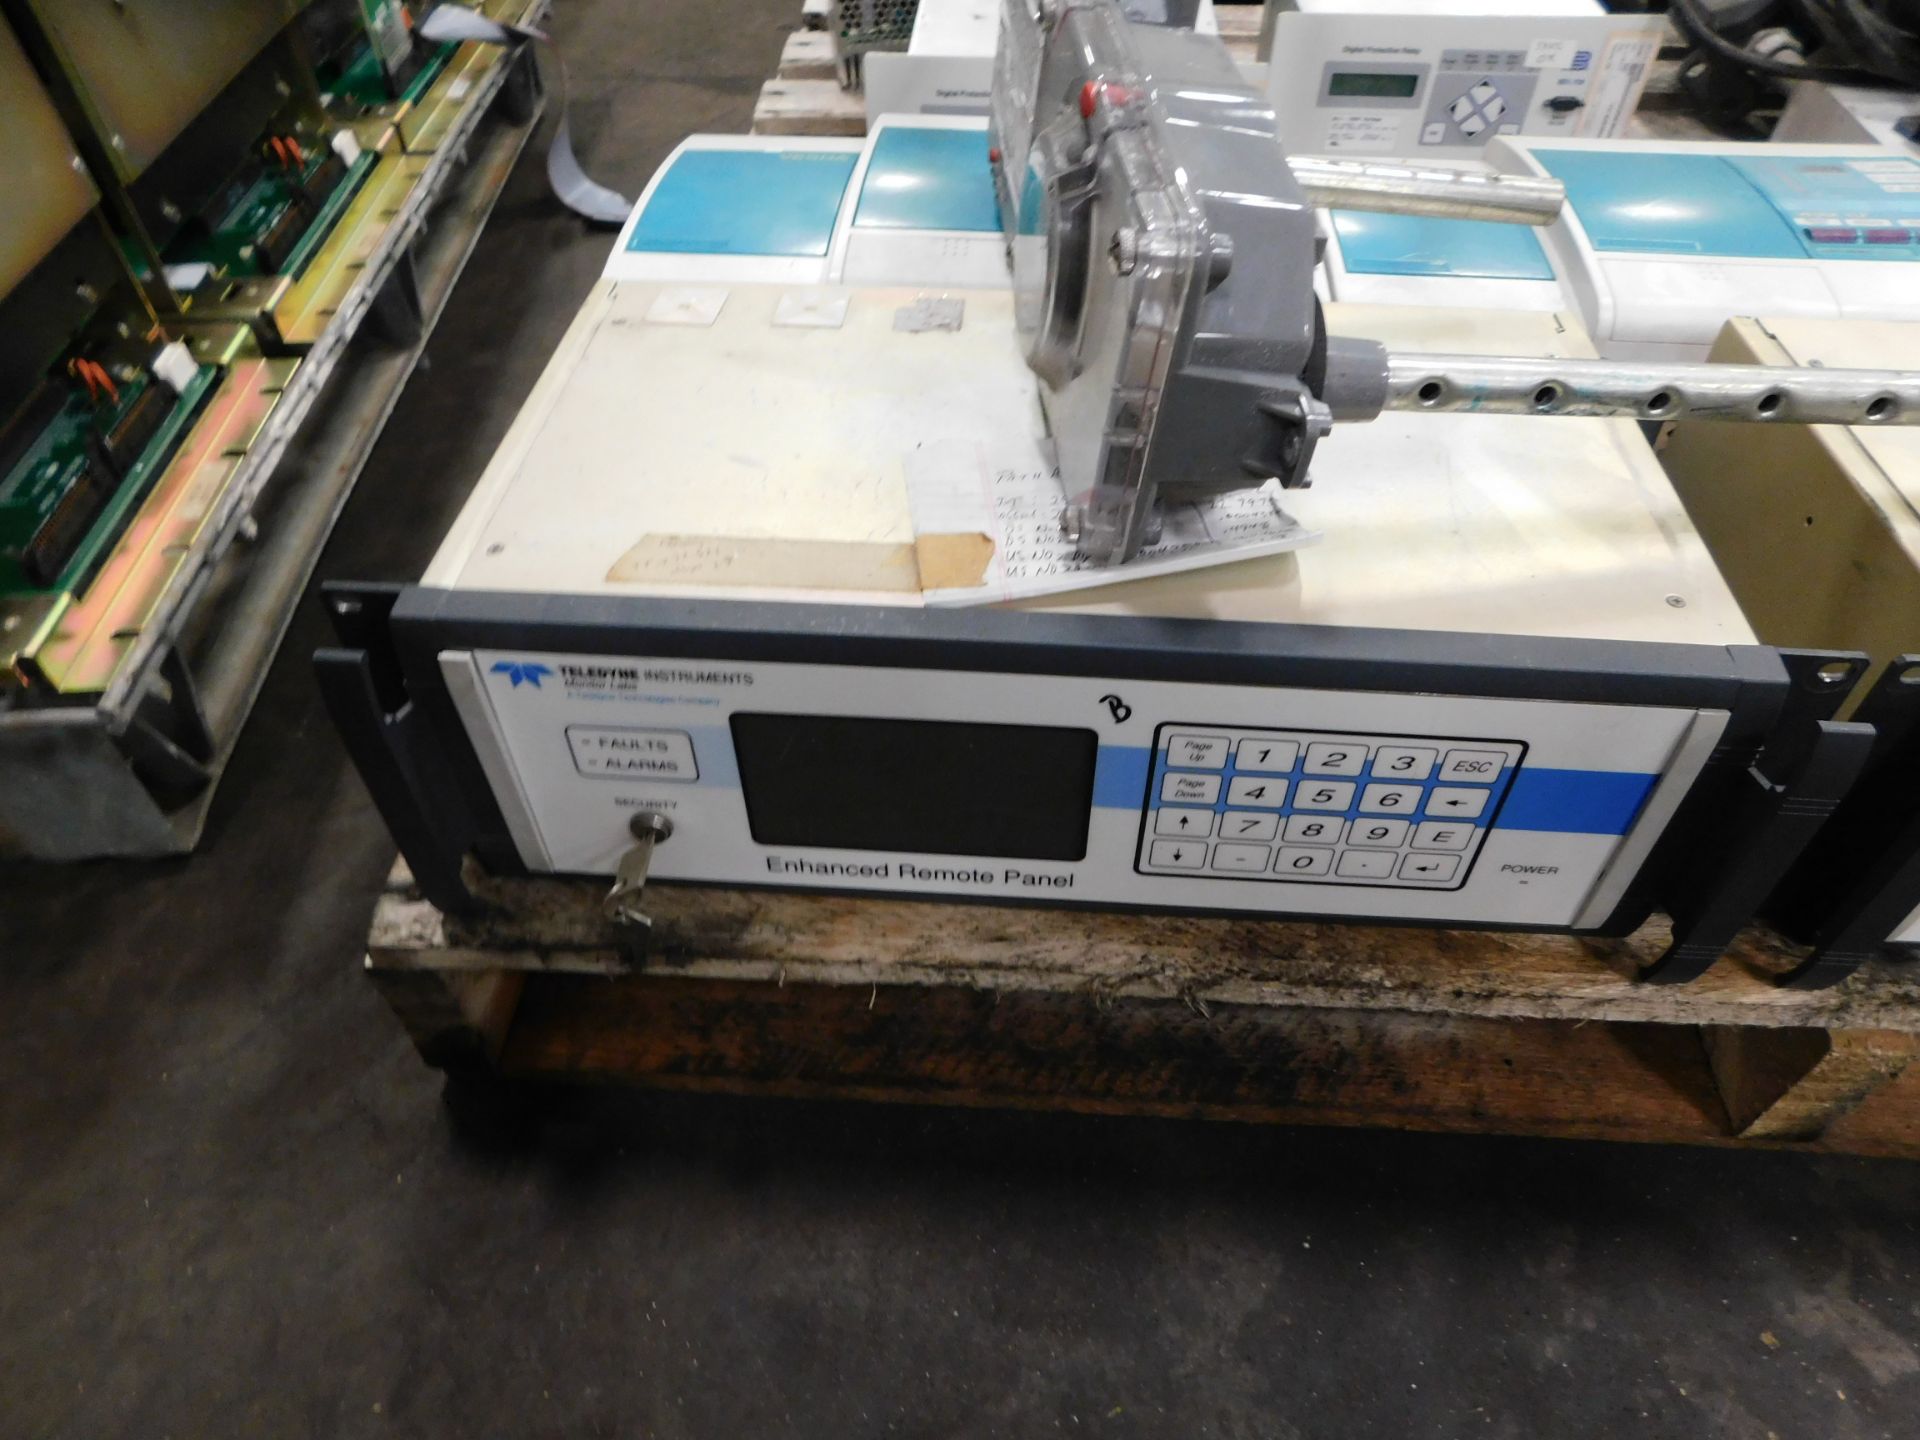 Pallet of Miscellaneous Testing Equipment - Teledyne, GE, etc. - Image 2 of 6